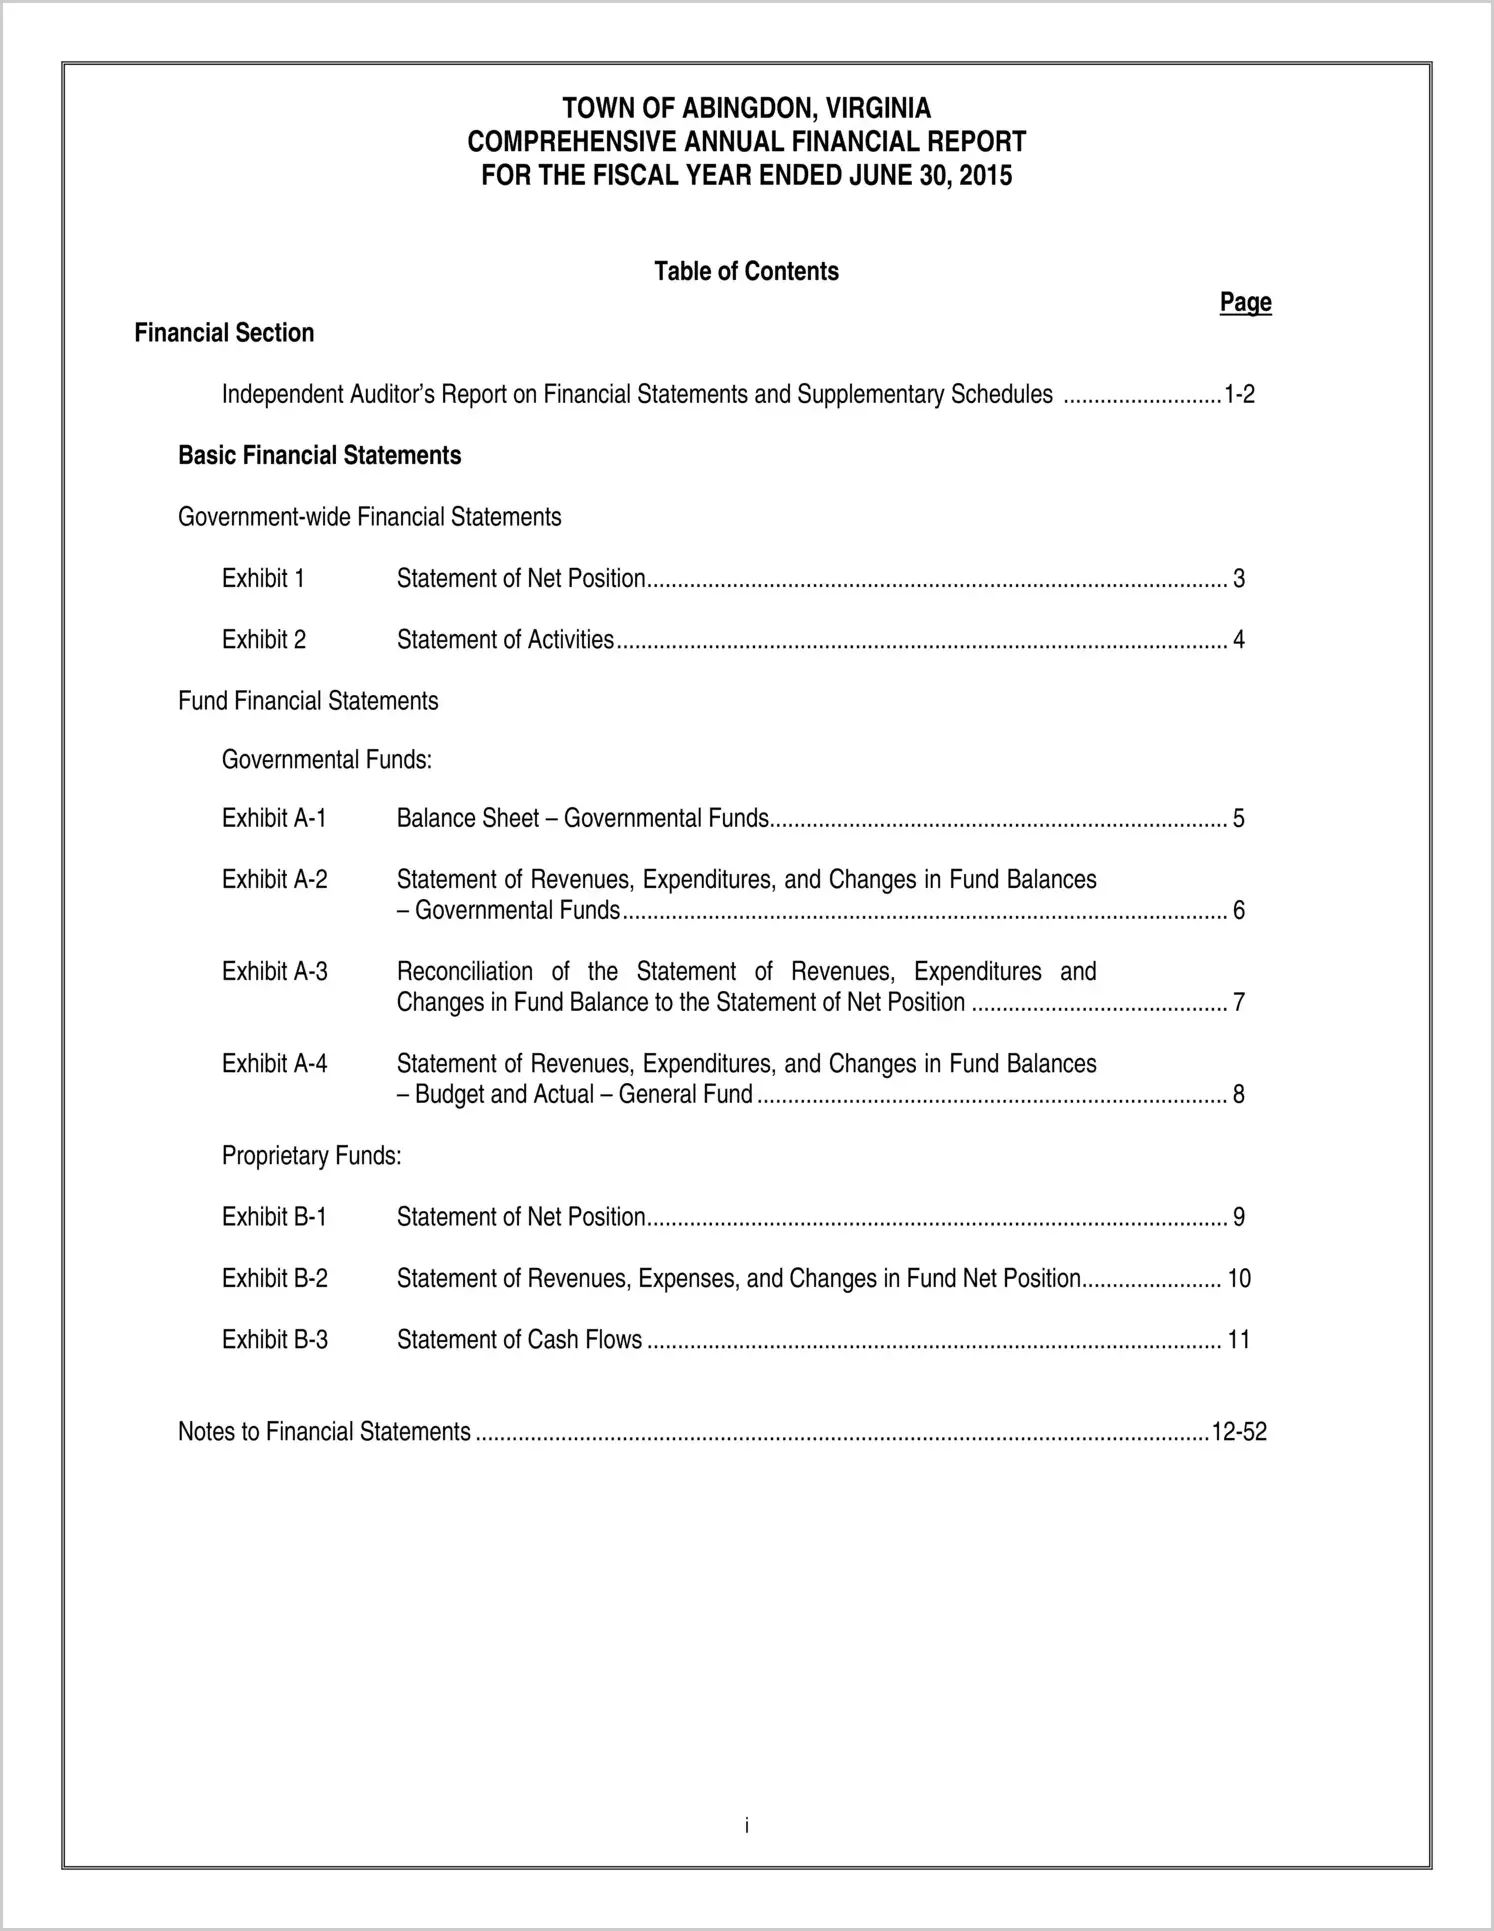 2015 Annual Financial Report for Town of Abingdon